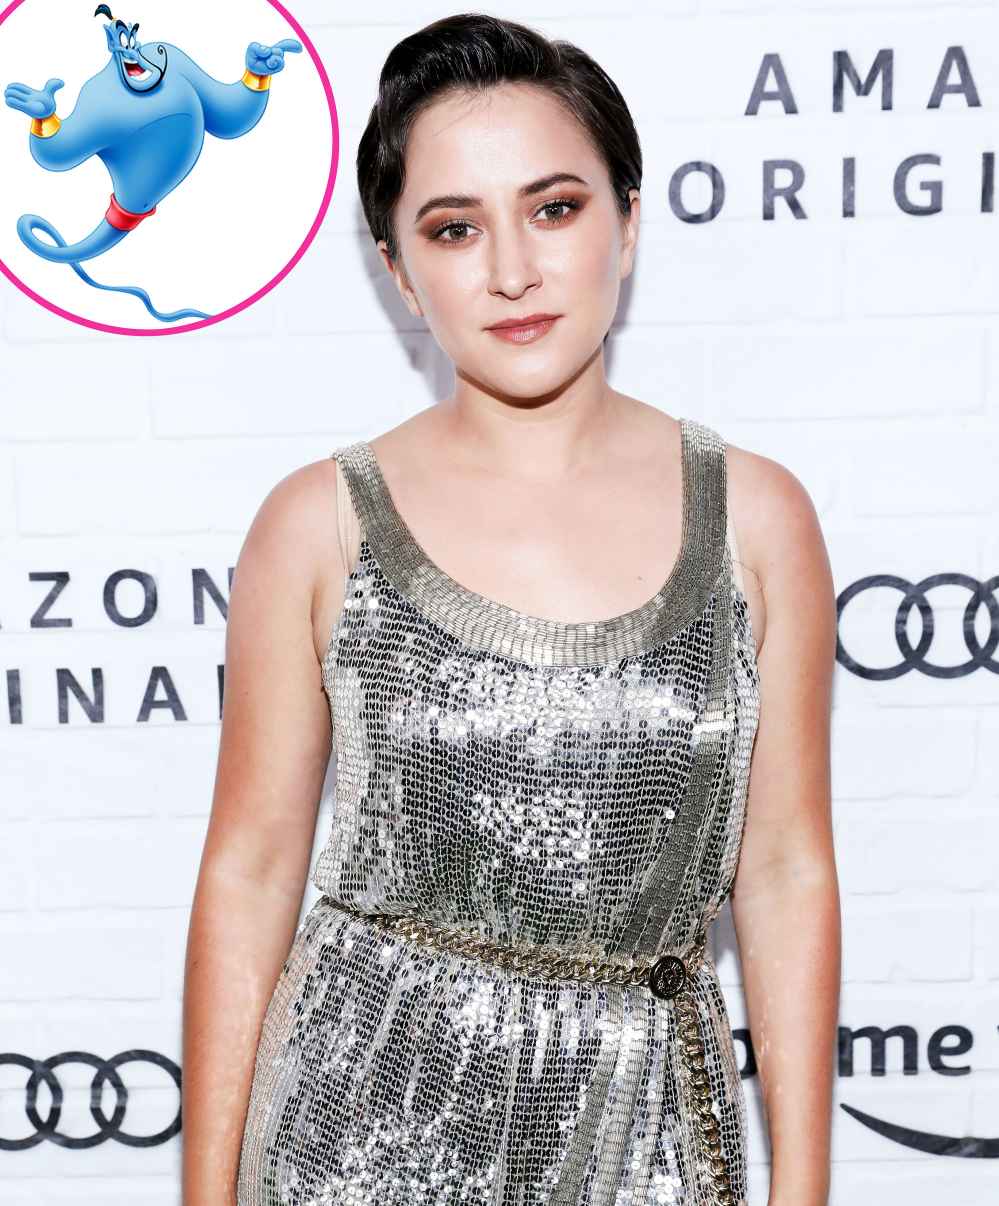 Robin Williams Daughter Zelda Matches With Genie While Using Disney Filter